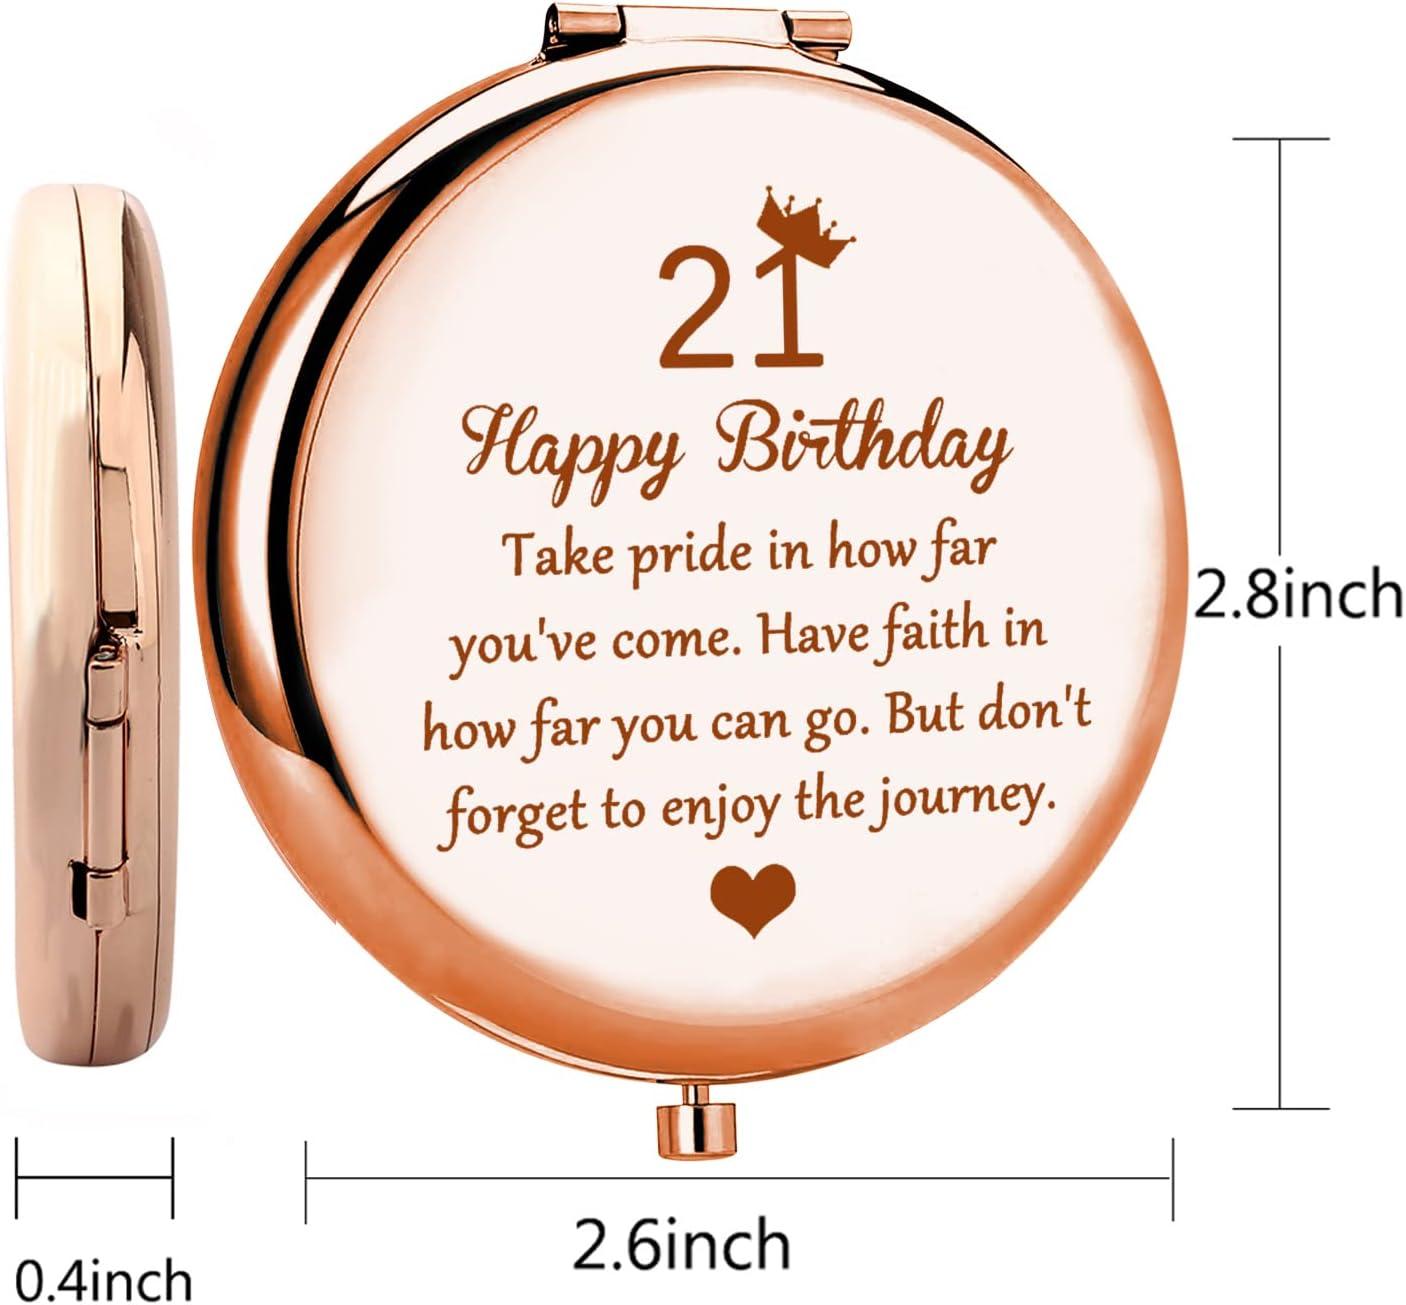 21st Birthday Gifts for Women 21 Year Old Birthday Gifts for Her Happy 21st Birthday Gifts for BFF Niece Girlfriends Compact Makeup Mirror for